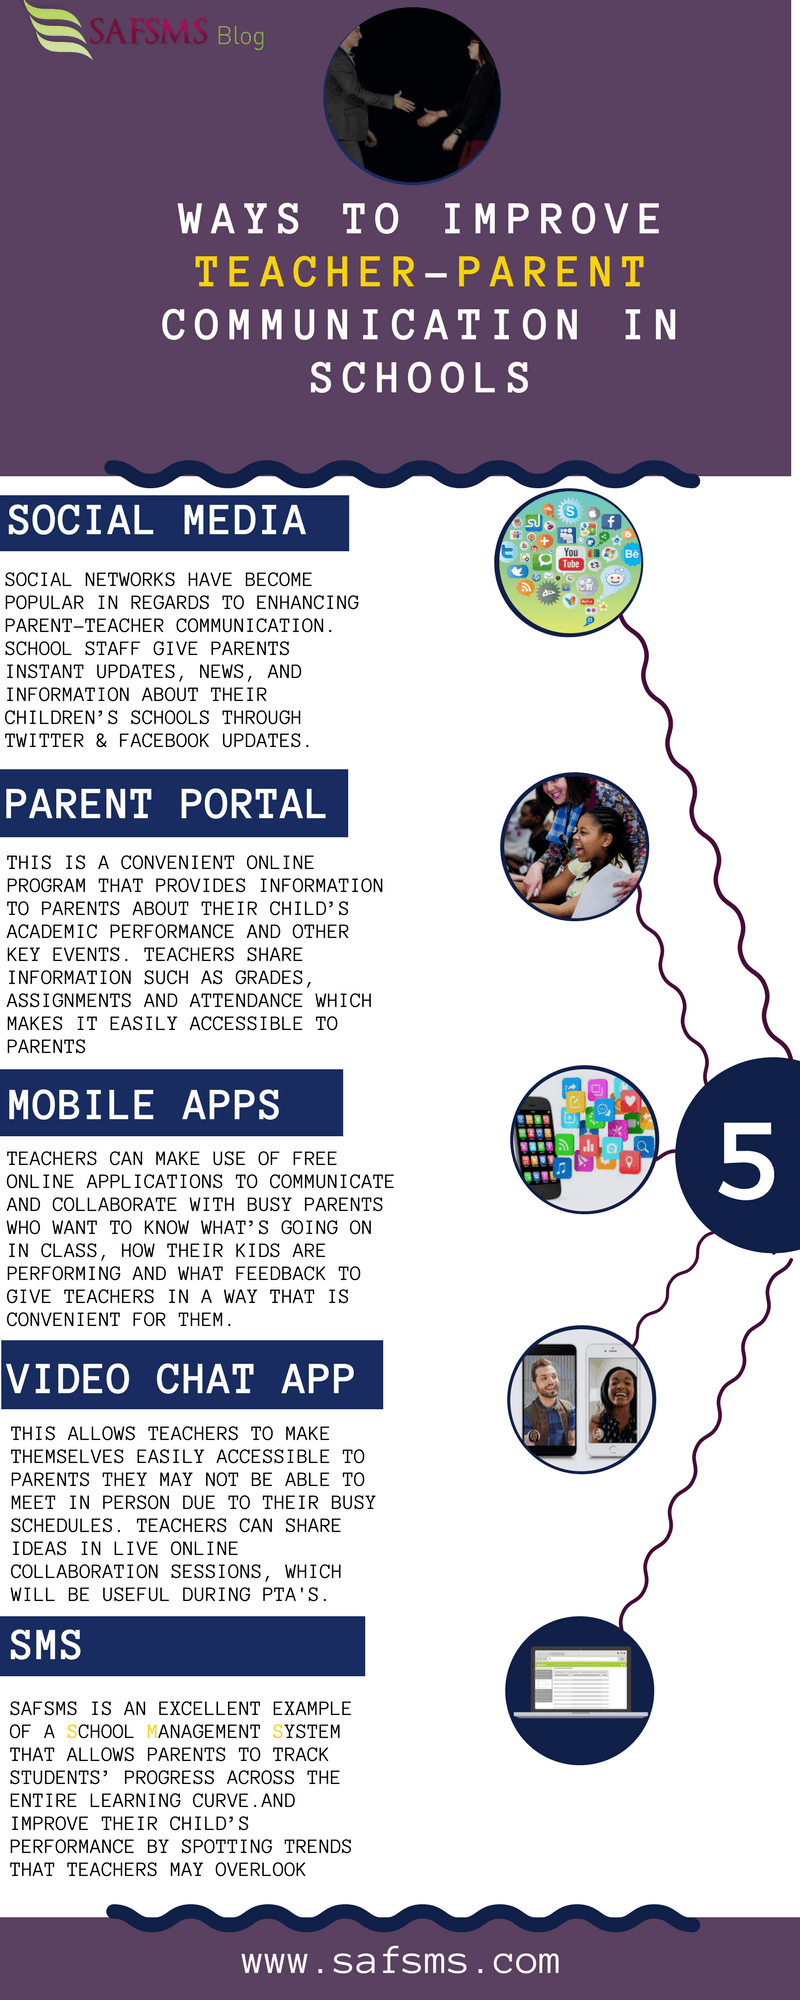 5 Tips For Improved Teacher-Parent Communication Infographic